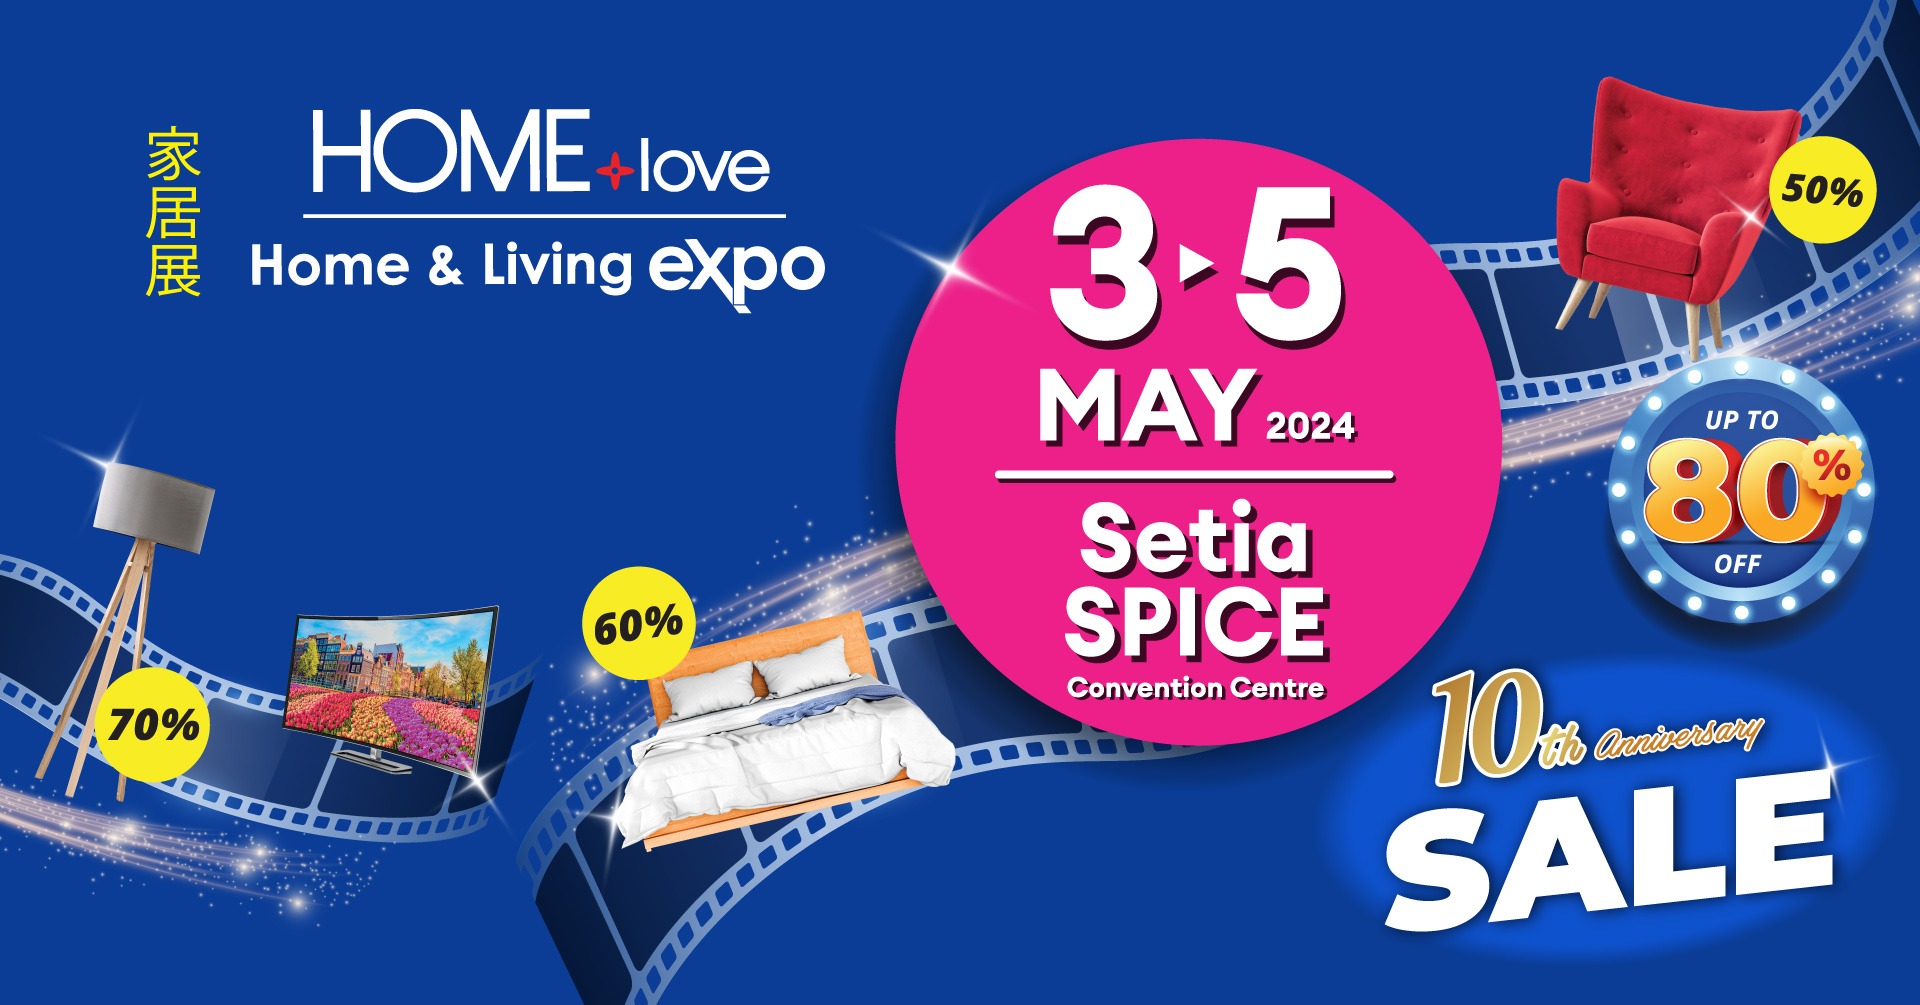 HOMElove Home & Living Expo: 3-5 May 2024 @ Setia SPICE Convention Centre (Penang)